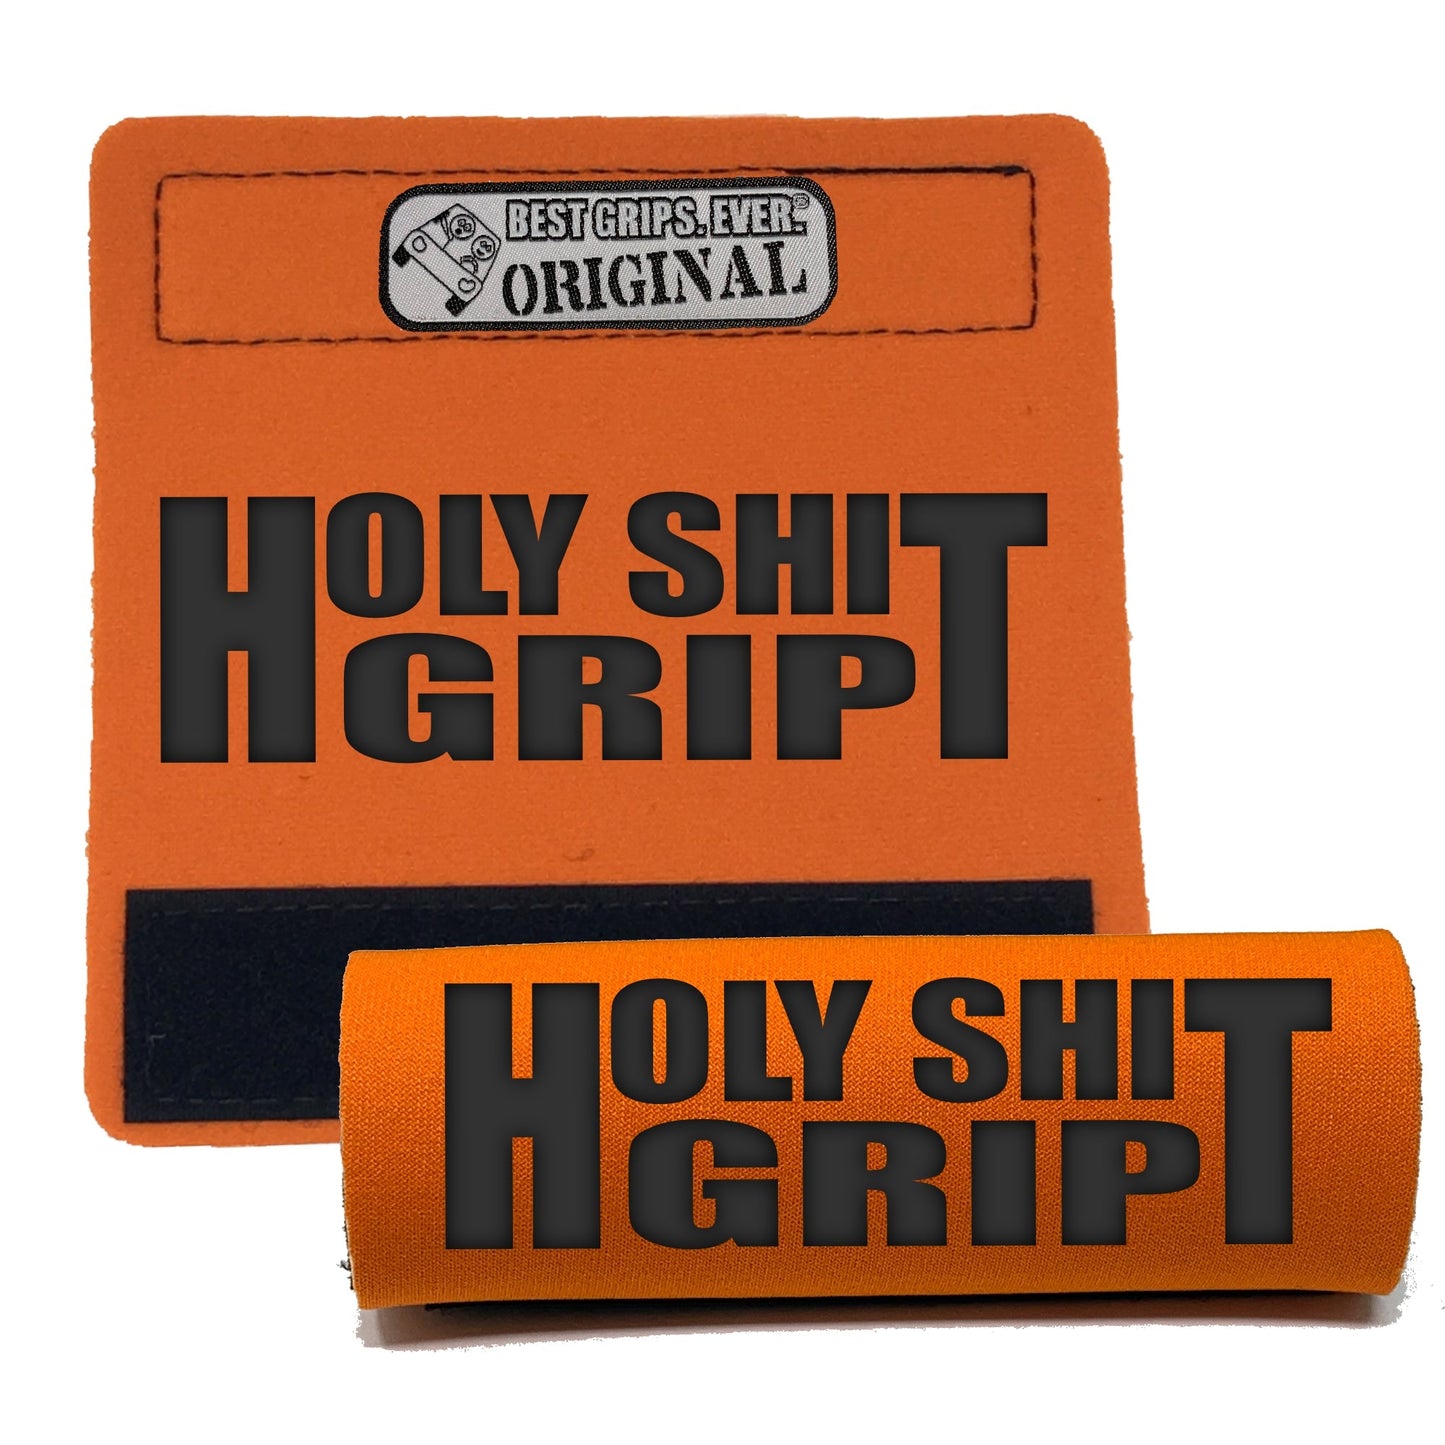 The Holy Shit Grip® (25 Pack)